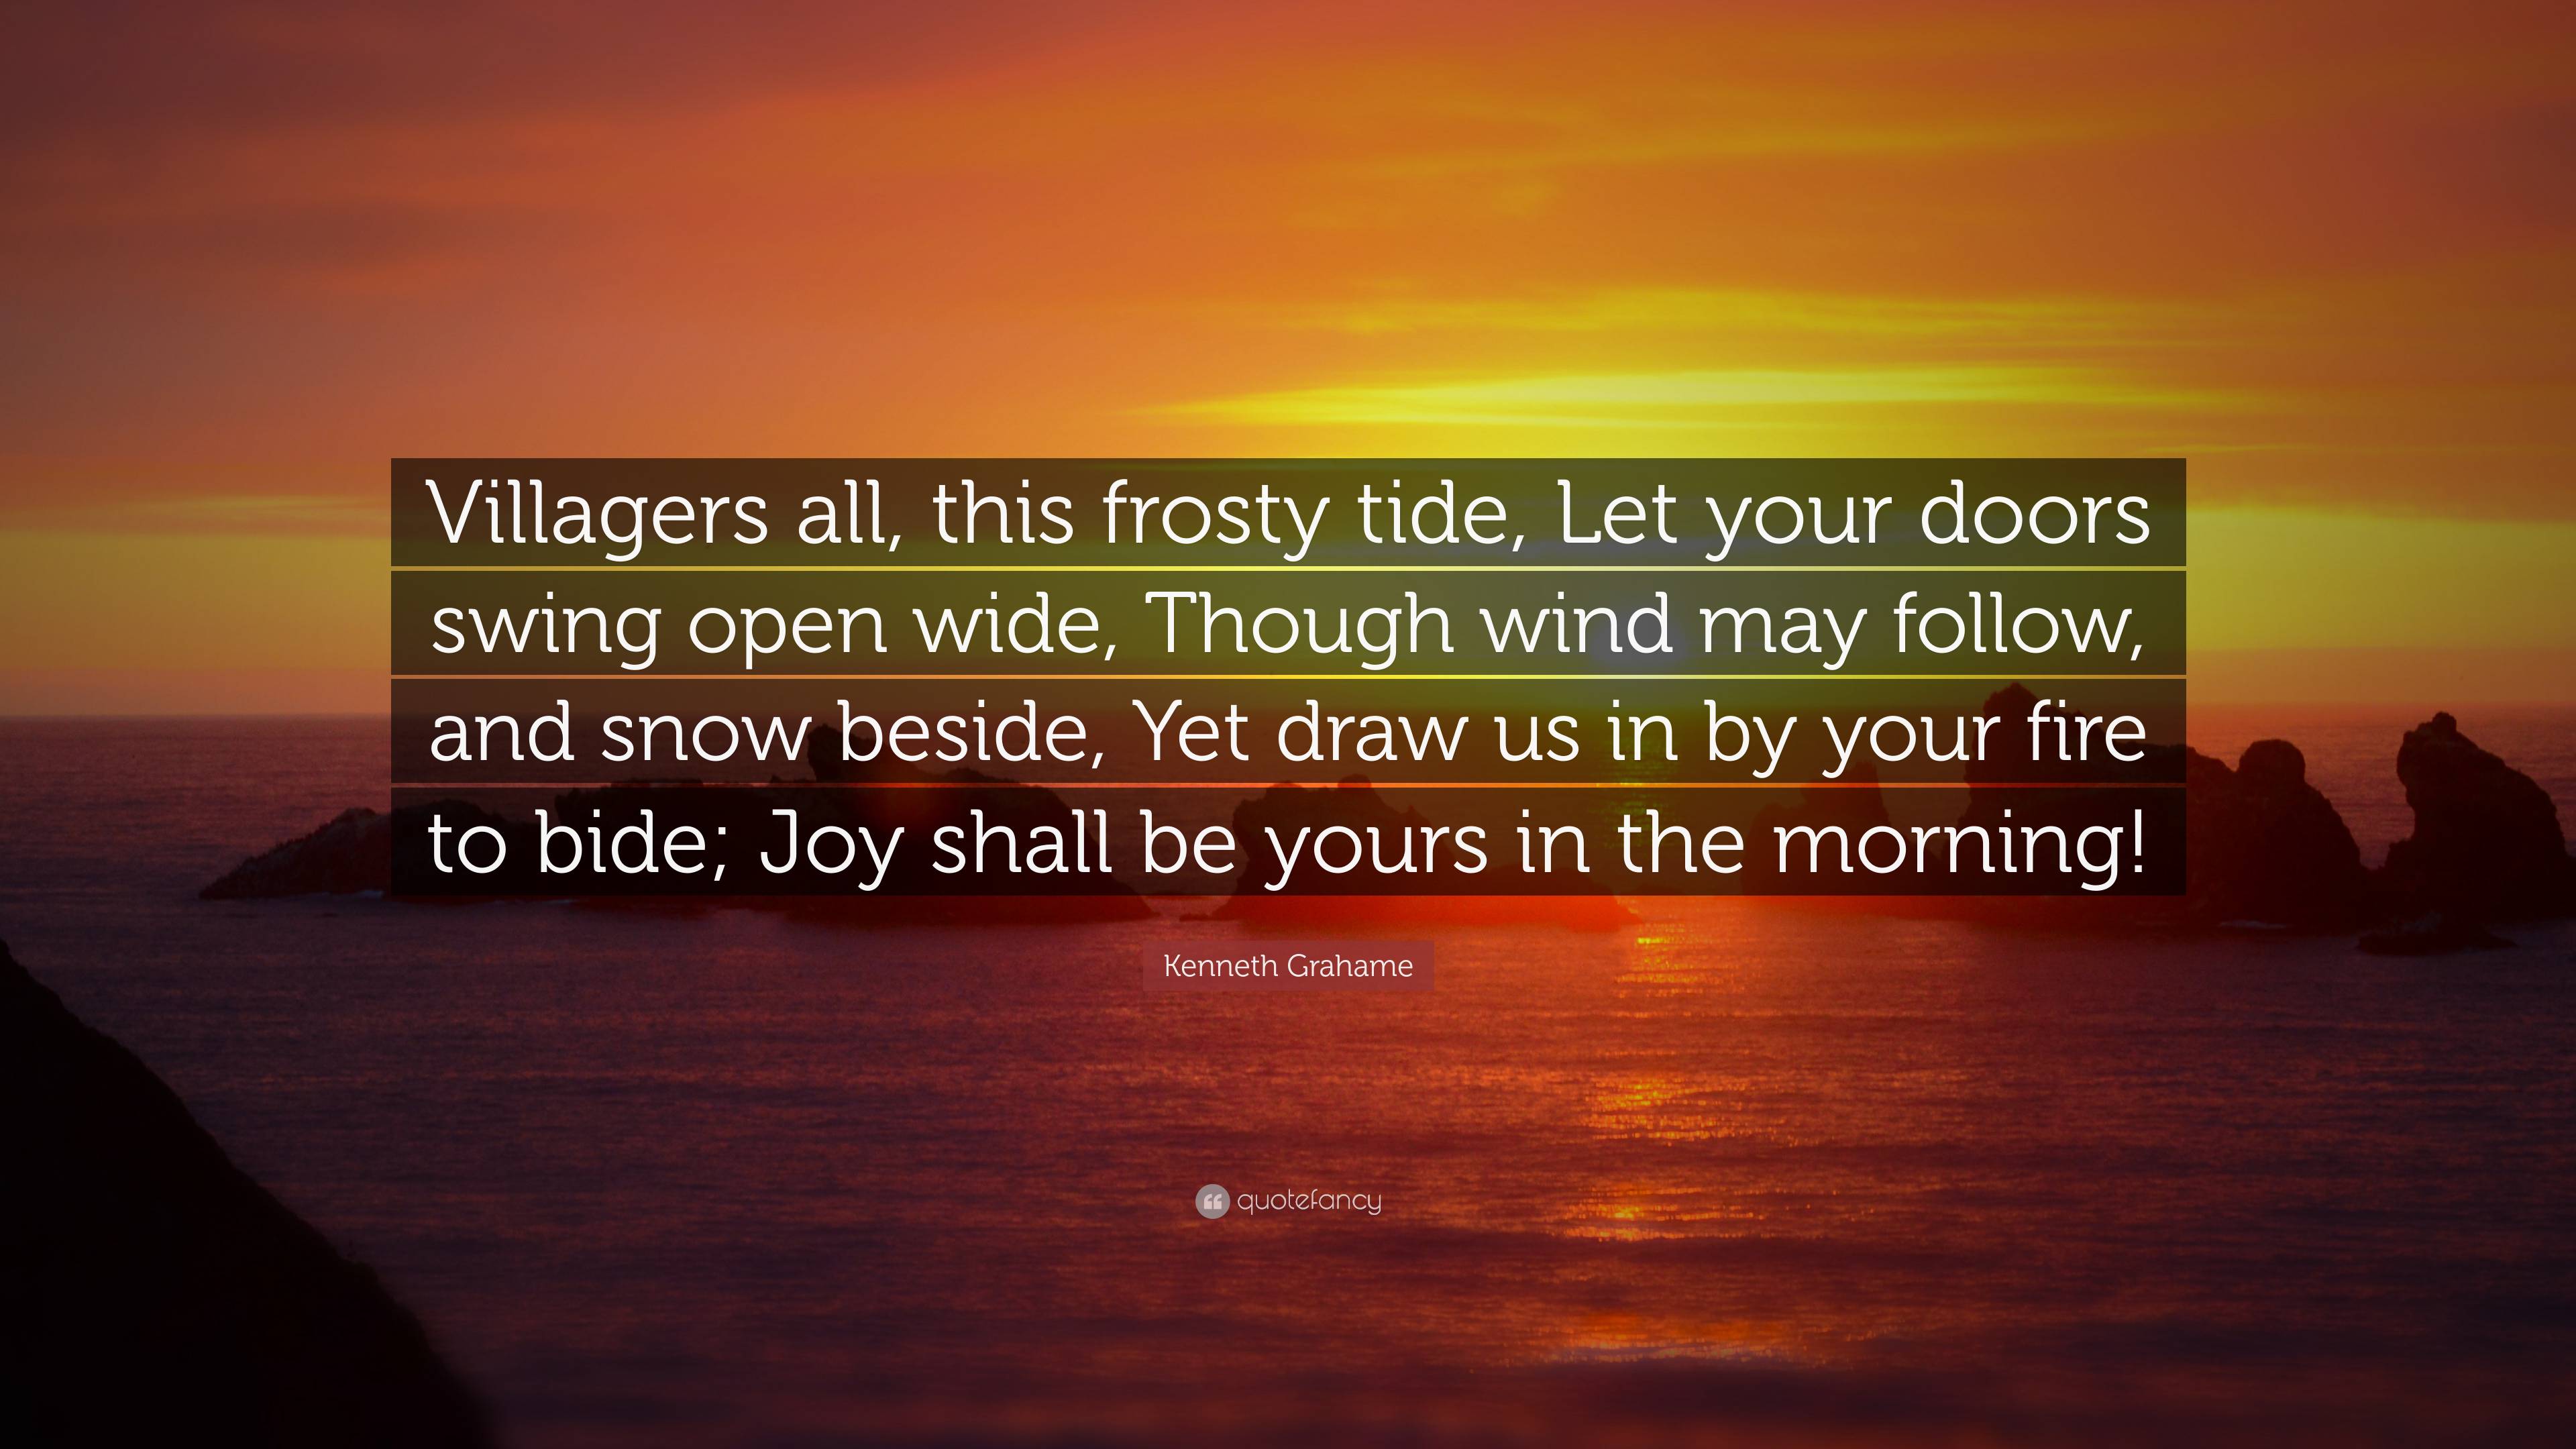 Kenneth Grahame Quote: “Villagers all, this frosty tide, Let your